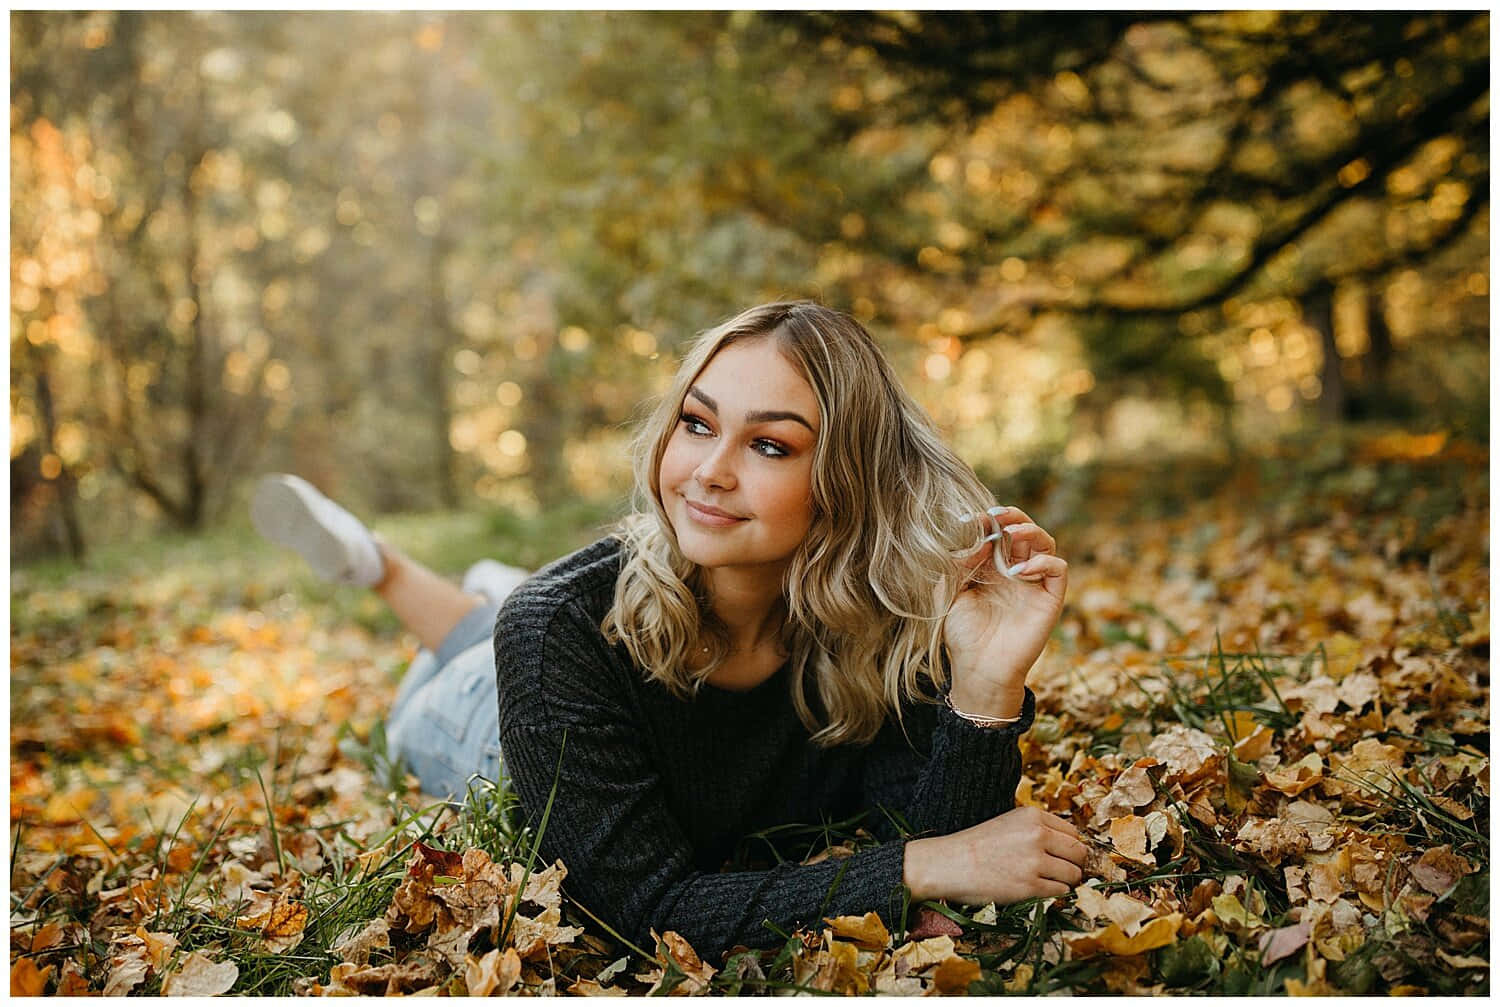 Capture the beauty of fall with a senior portrait.